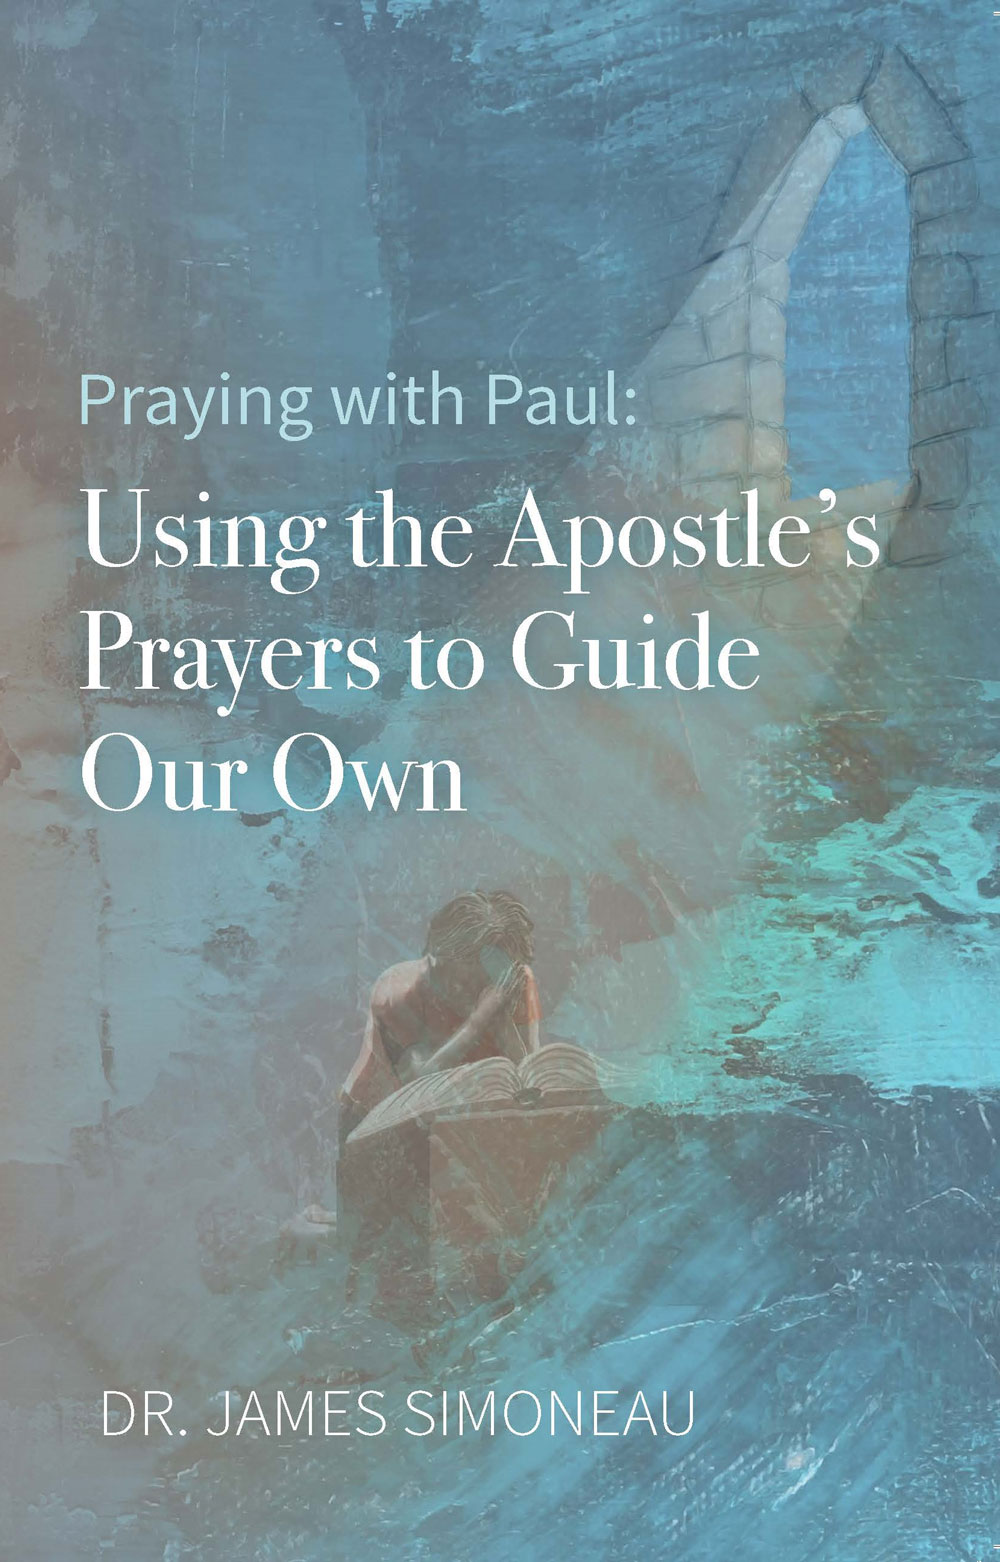 the　Apostle's　Praying　to　PCA　Paul:　with　Bookstore　Prayers　Our　Using　Guide　Own